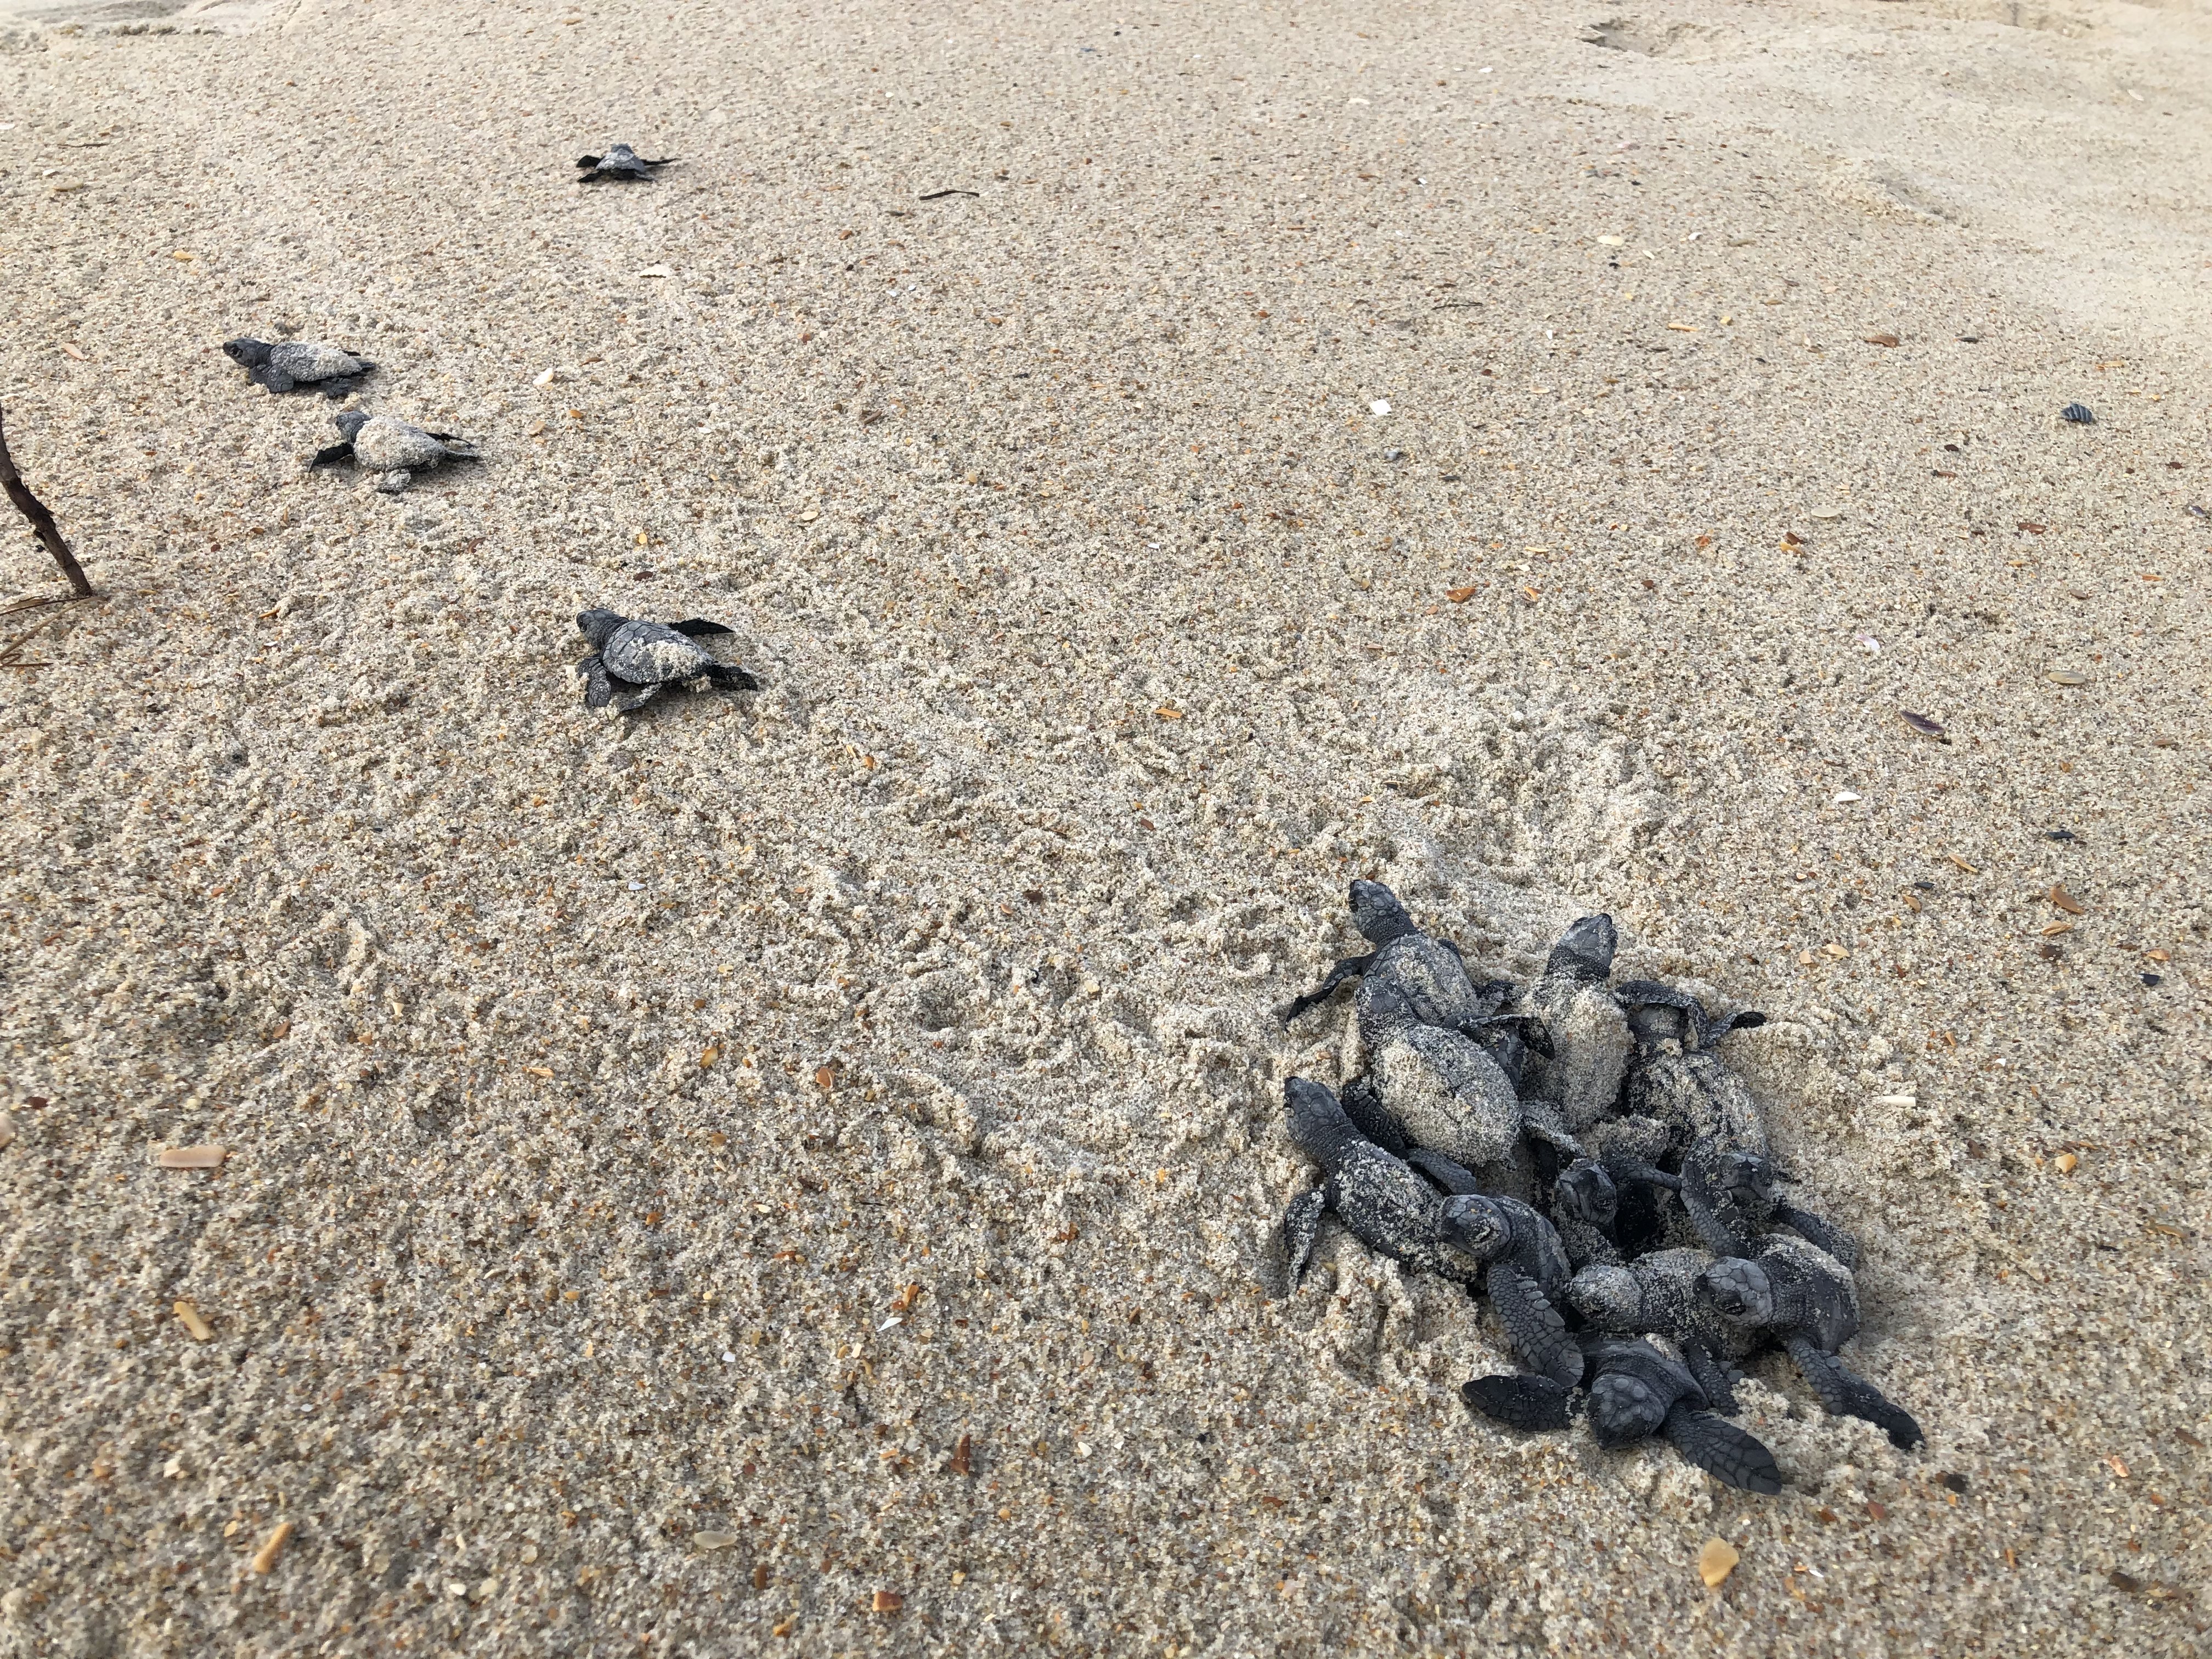 Many Kemp's Ridley sea turtle hatchlings emerge from sand and crawl toward the Atlantic Ocean.